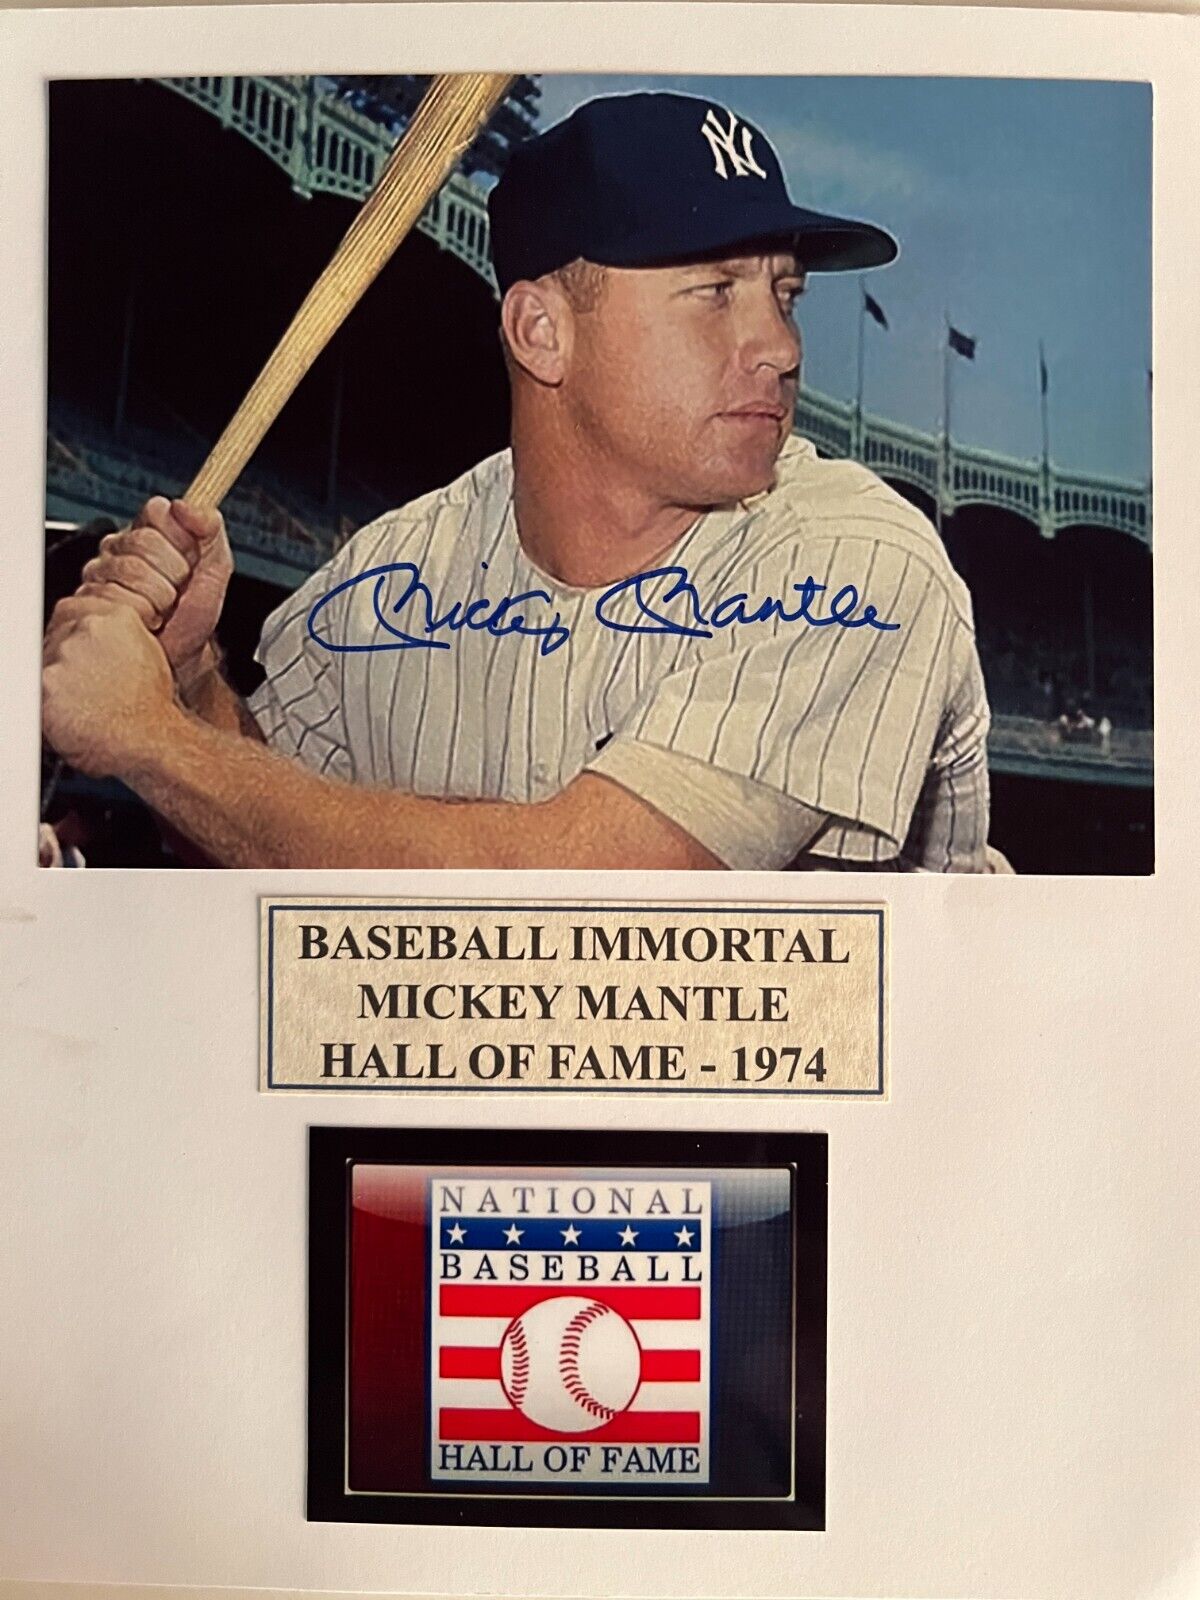 NY Yankees Mickey Mantle signed photo. 8x10 inches